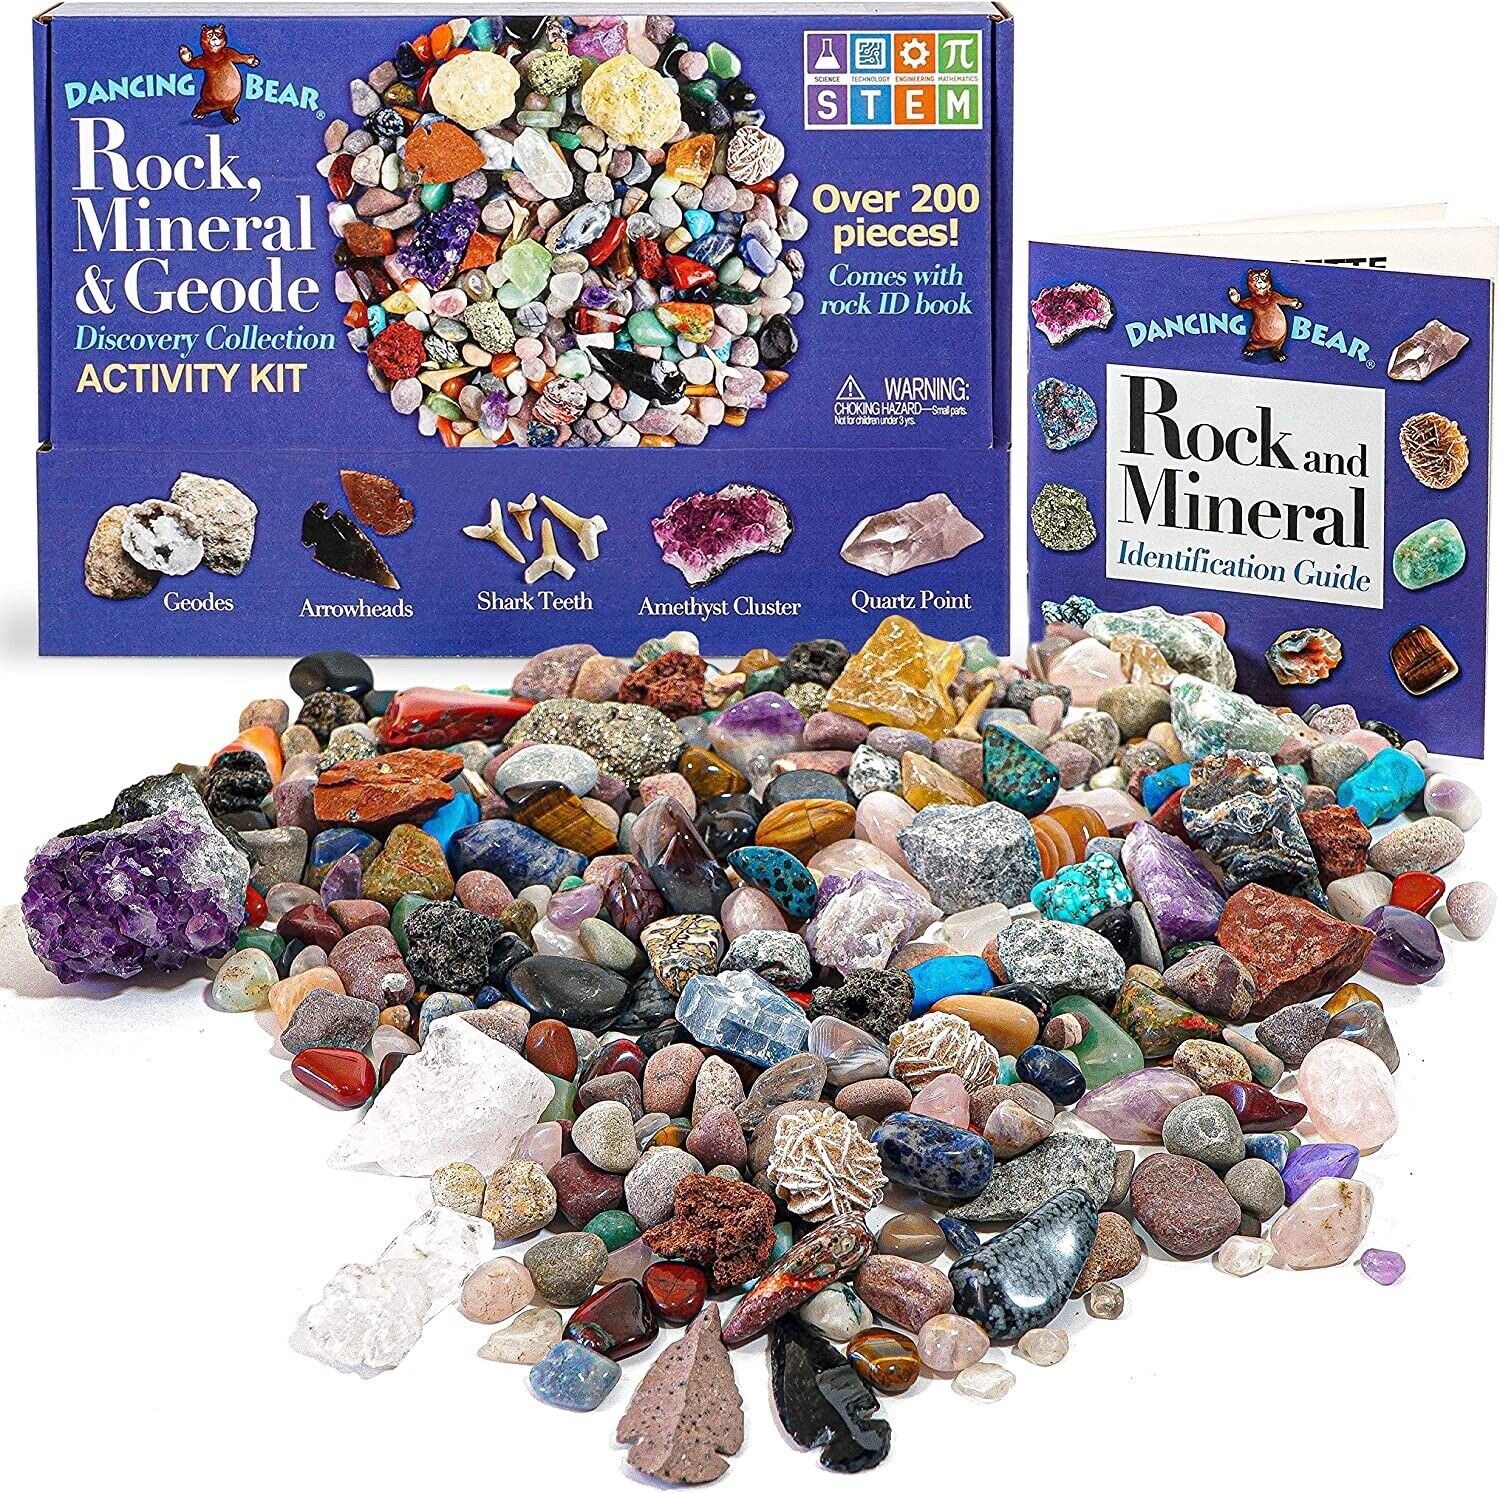 Rock & Mineral Collection Activity Kit (200+Pcs) with Geodes, for kids, STEM